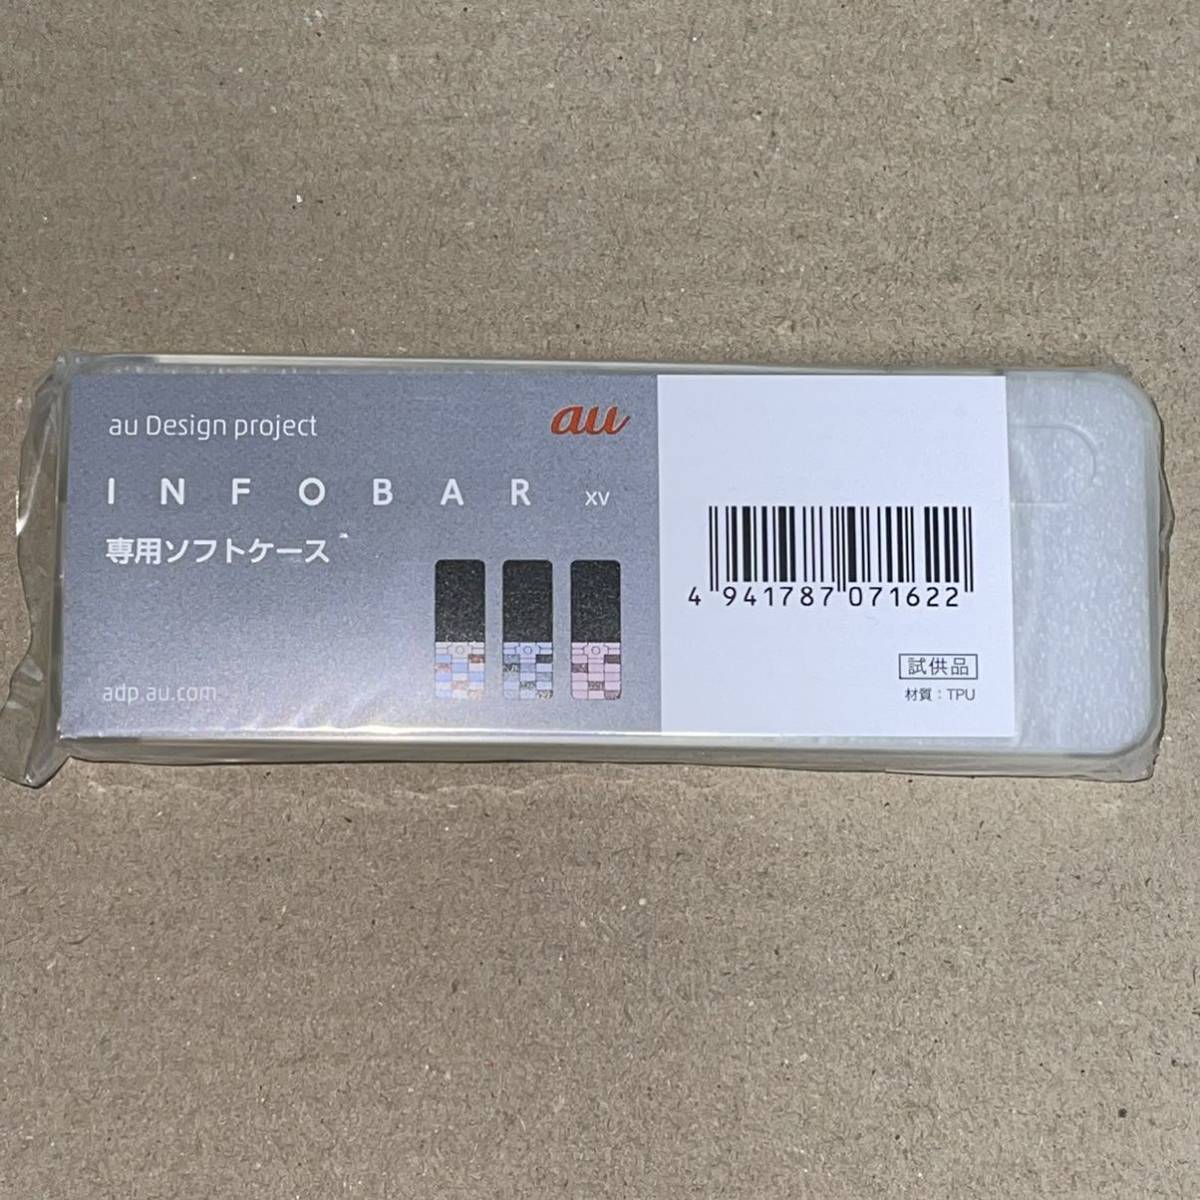  not for sale original cover INFOBAR xv Info bar KYX31 exclusive use soft case au new goods unused 